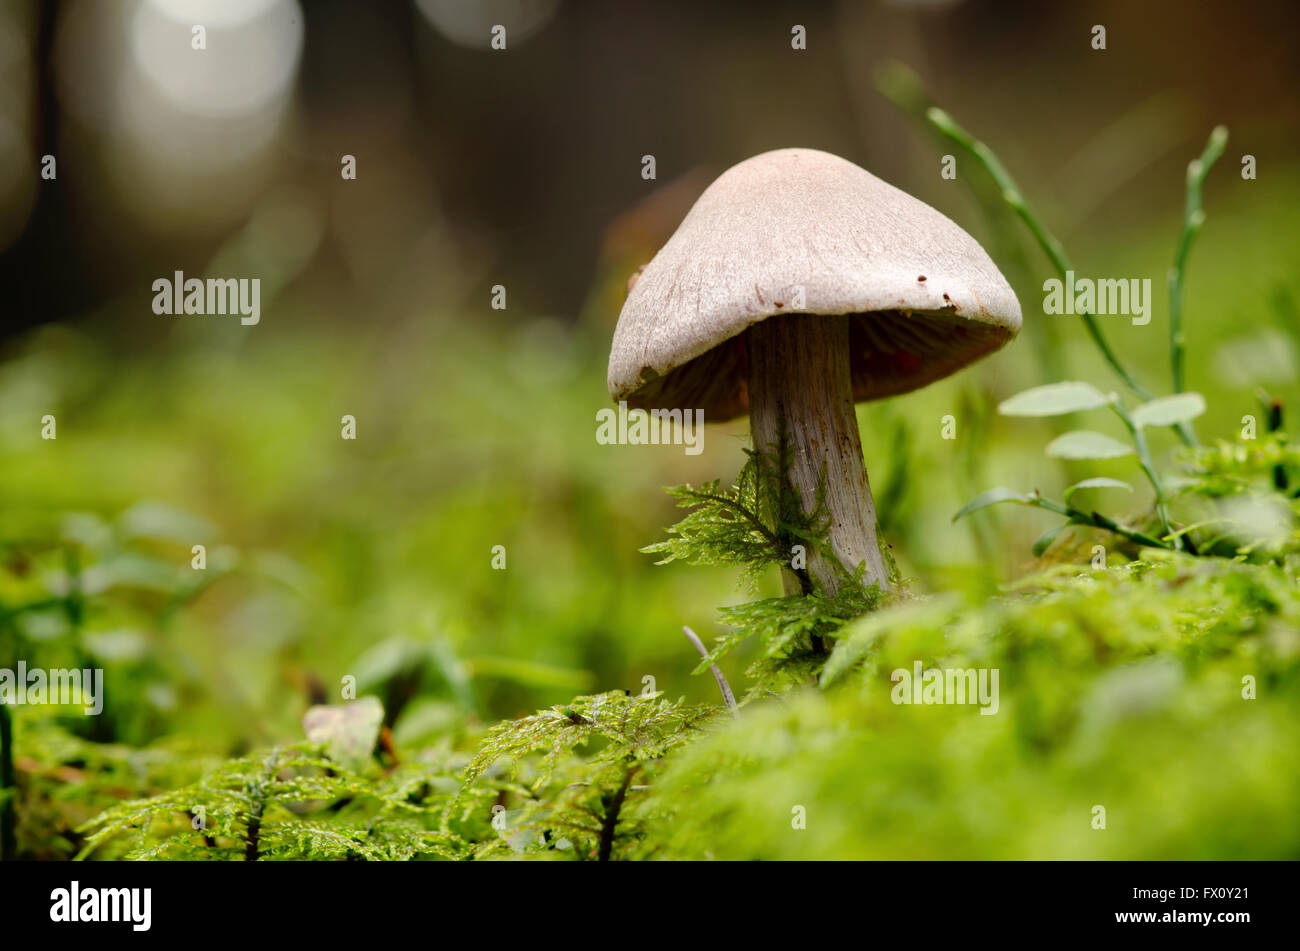 Mushroom on moss surface in the forest. Stock Photo